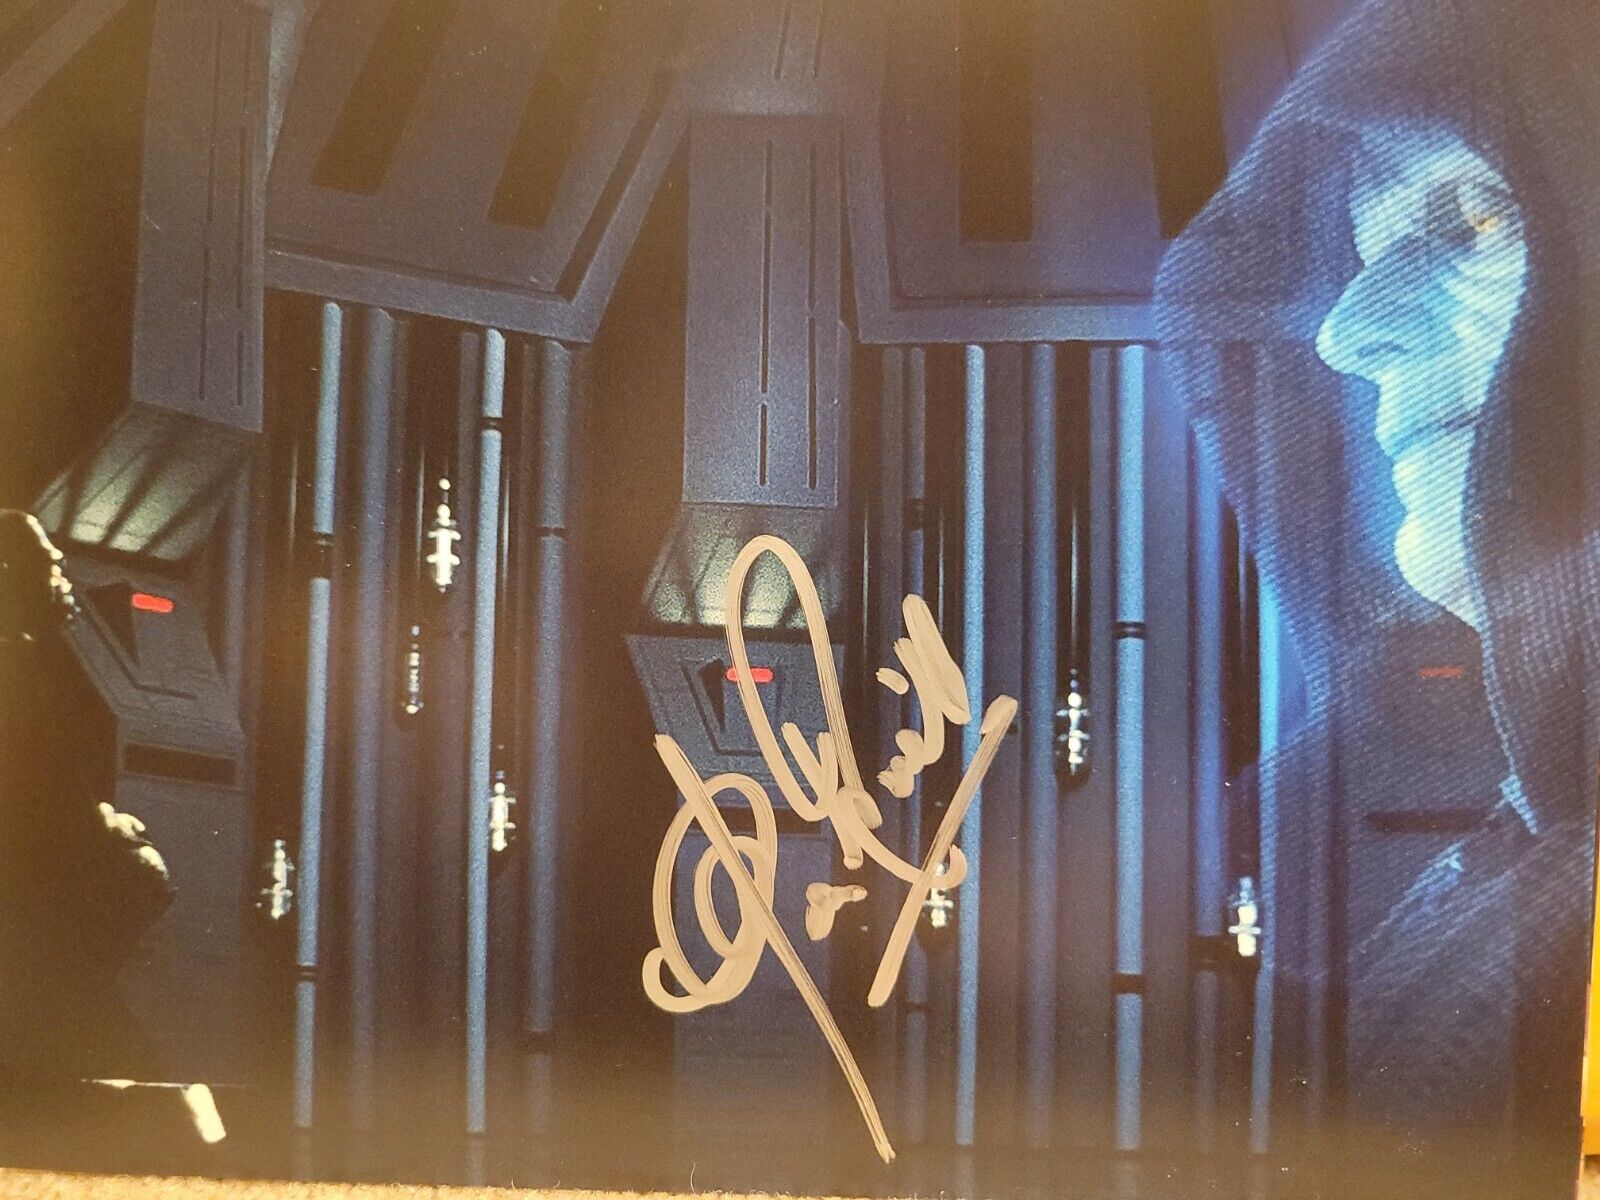 CLIVE REVILL Signed 8x10 Photo Poster painting Autographed Star Wars Emperor Sheev Palpatine